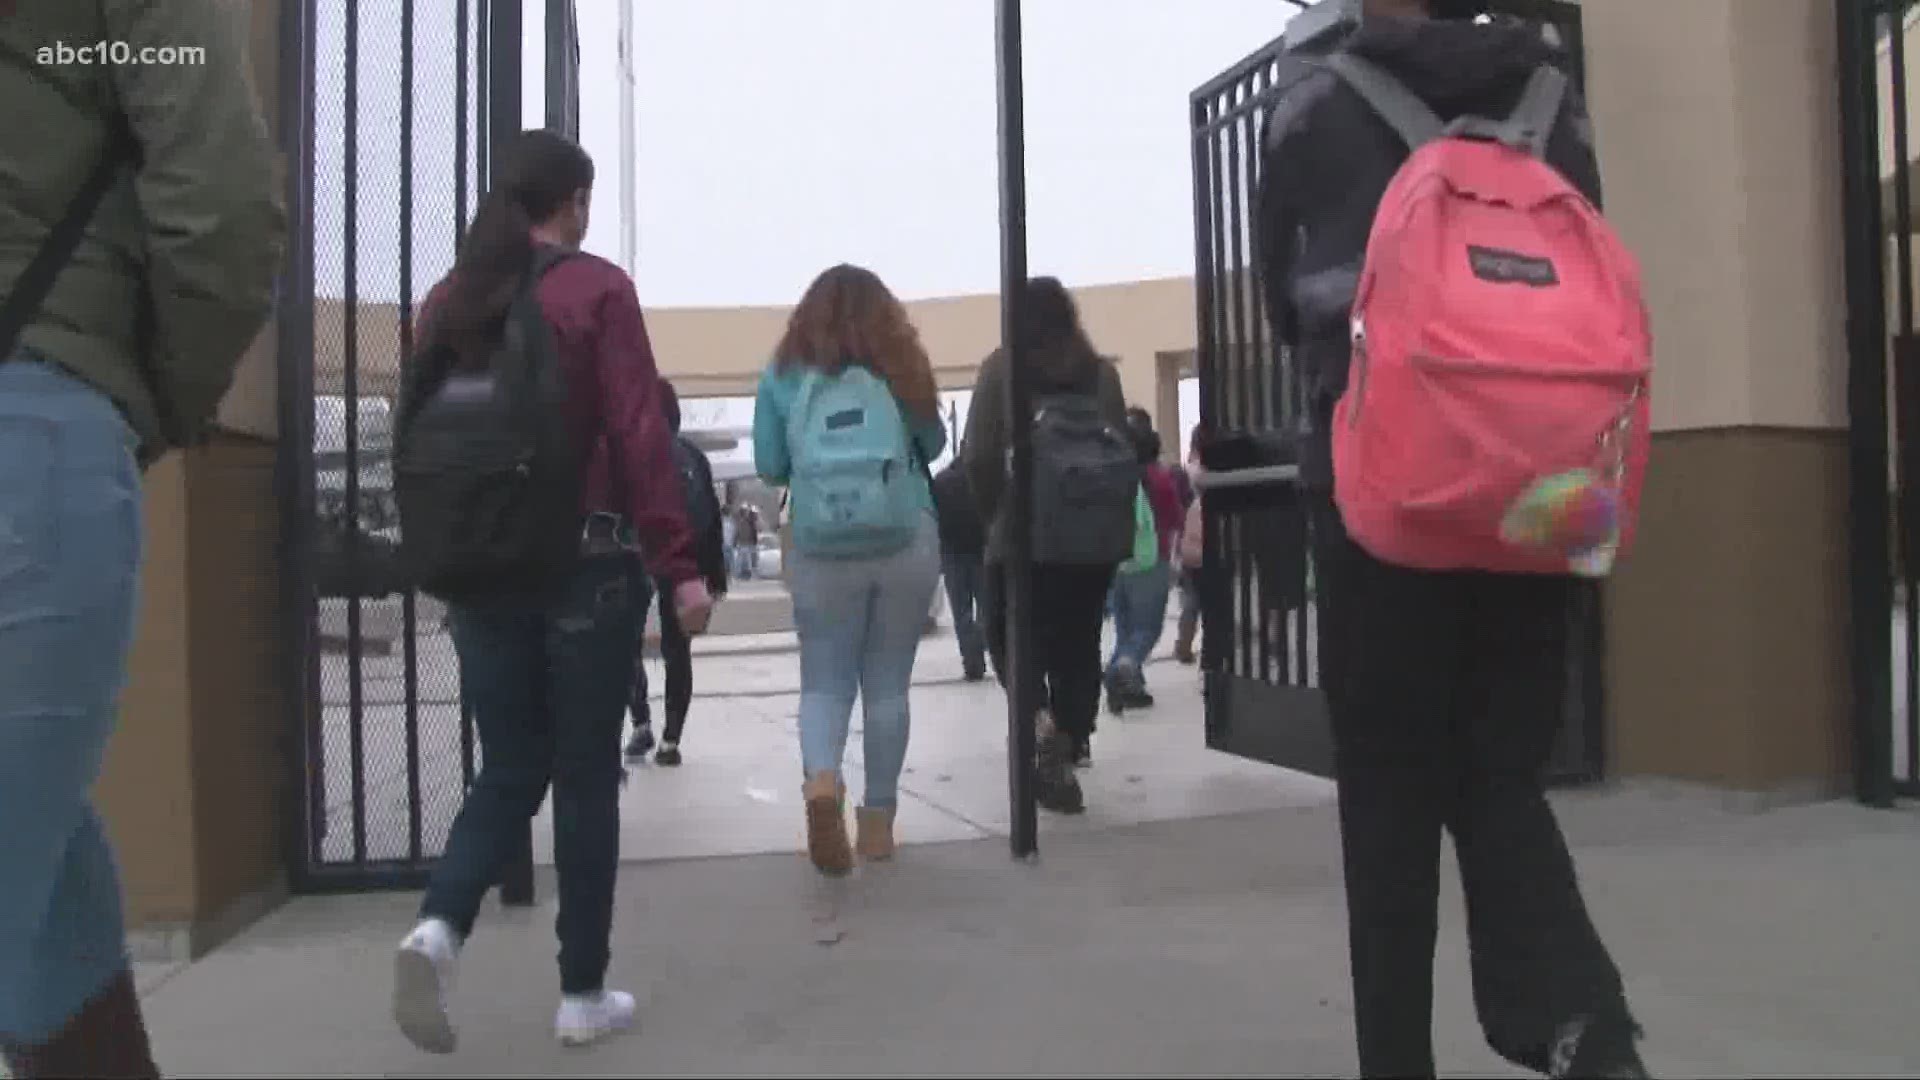 The Sacramento City Unified School District released its first draft plan to bring students back to in-school learning for fall classes.